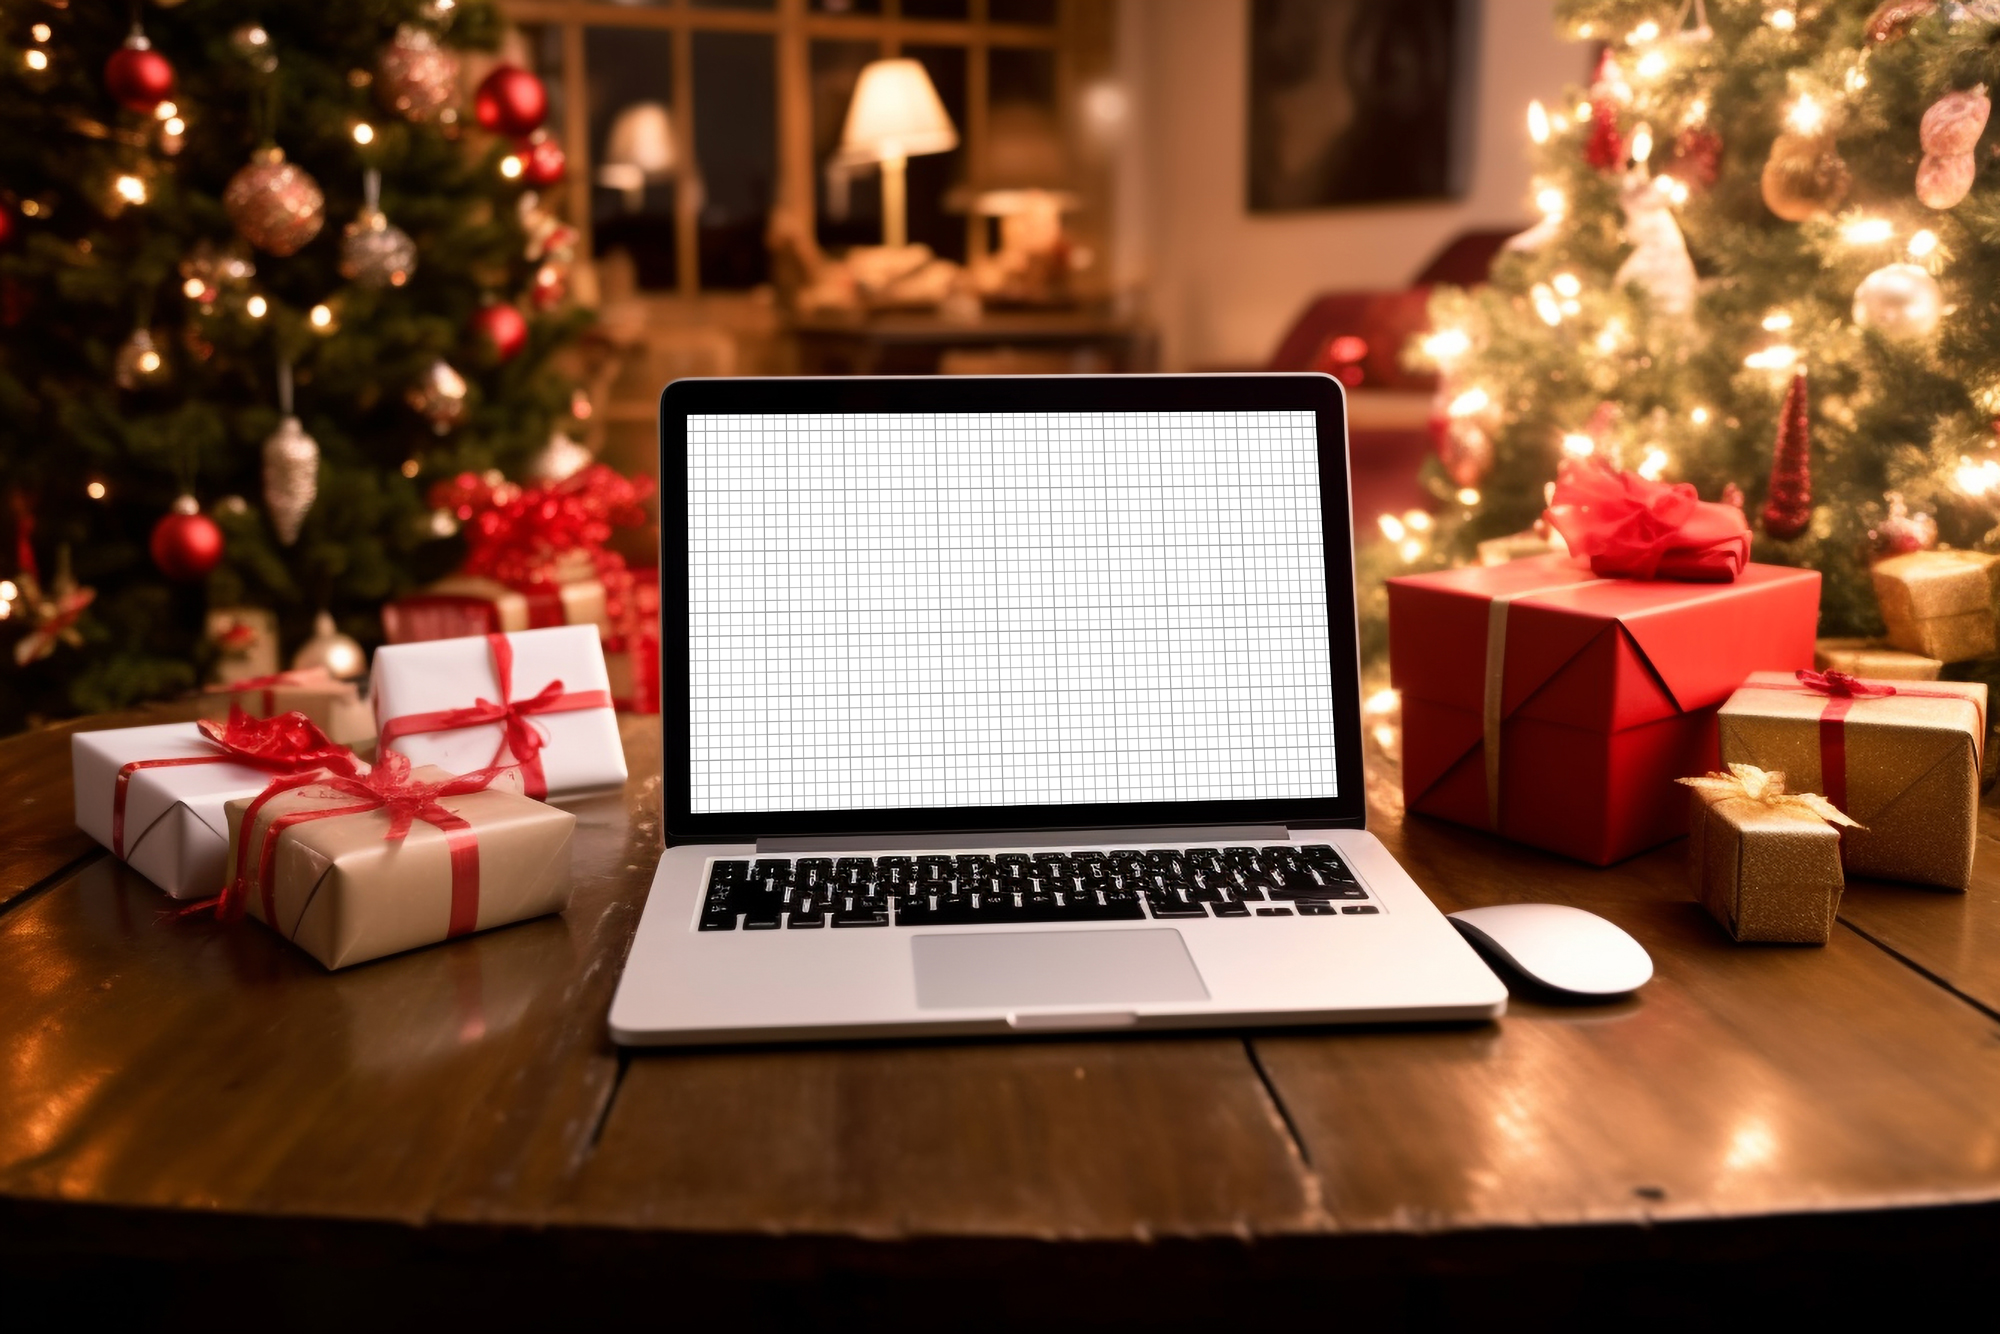 Free Download MacBook Mockup on Wooden Desk with Christmas Gifts grid